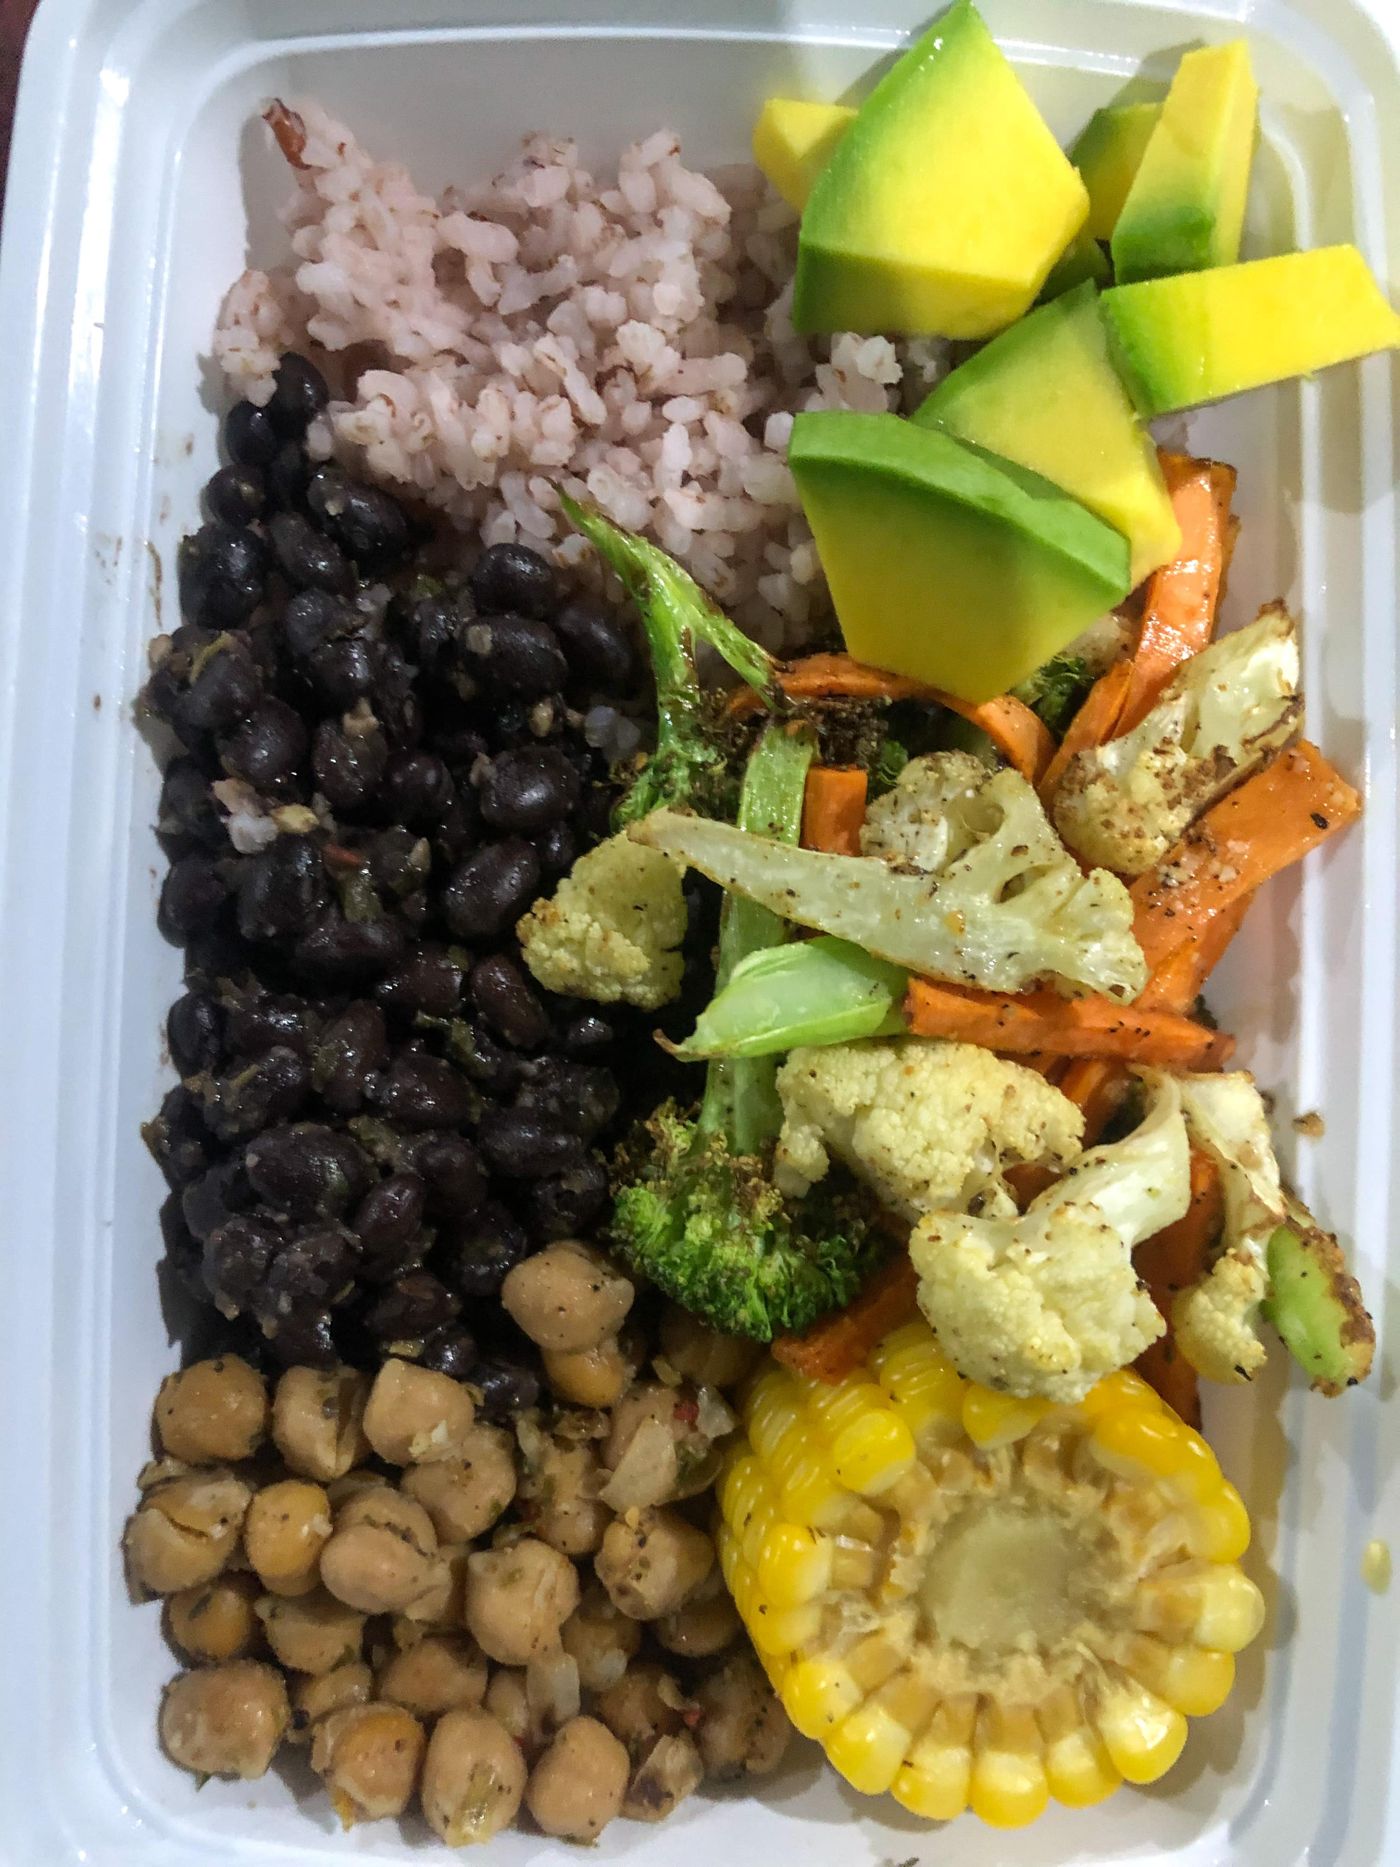 It all goes hand in hand. Being active and making sure your day is “nutritionally sound”. ✨✨

Balance your meals always… 🥑 🍗 🍚 
Be consistent with your training… 🏋🏾‍♀️ 

Could never go wrong.. 🙌🏽😎